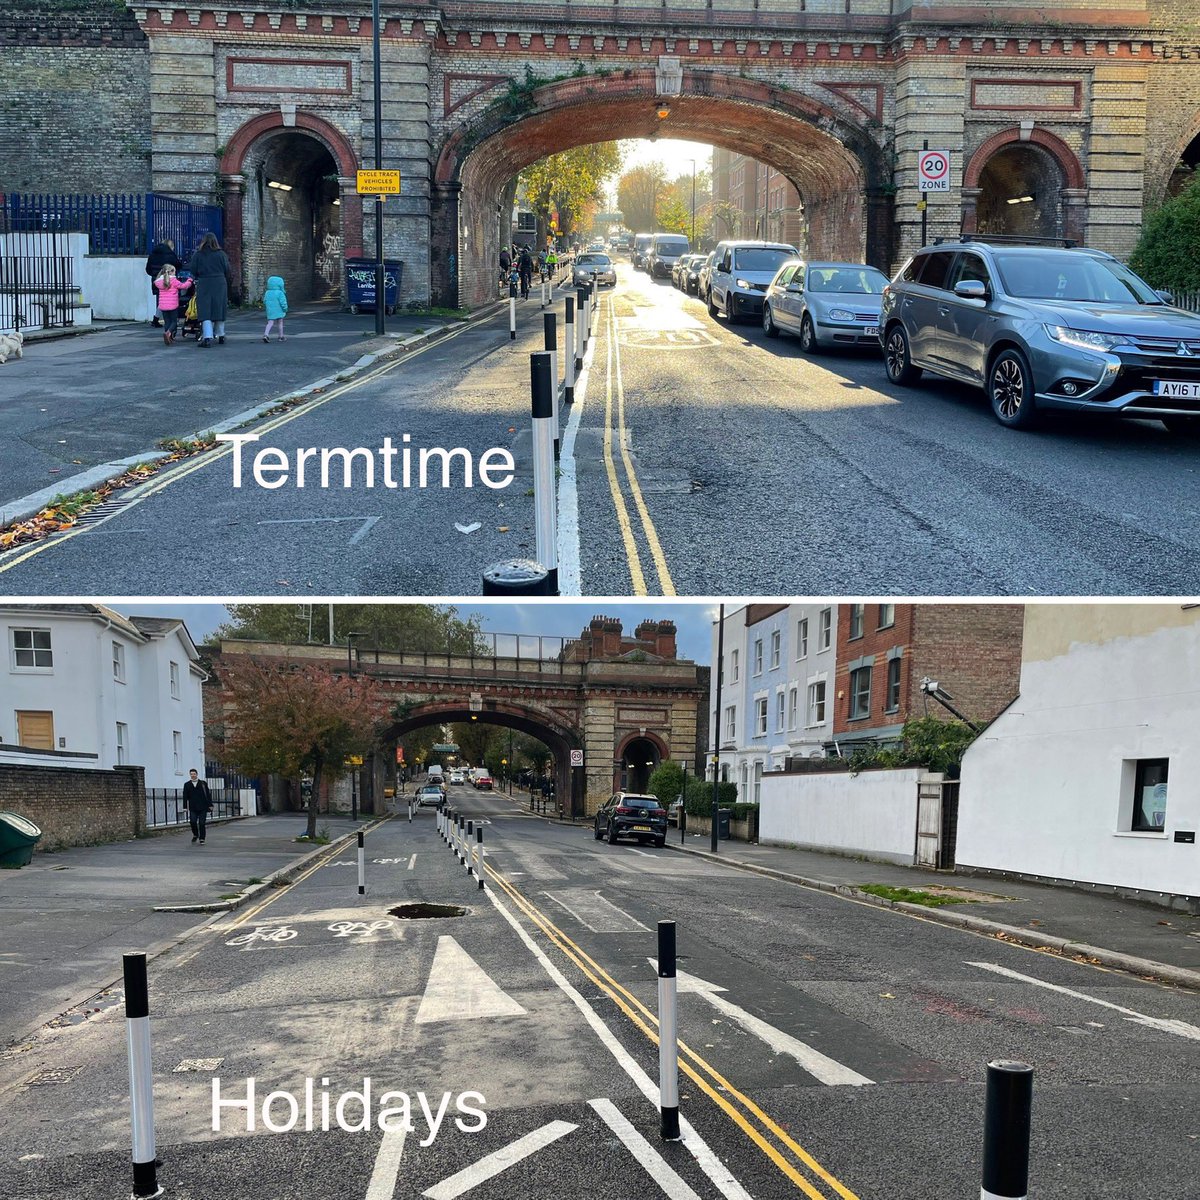 2/2 If we ever want #cleancities, #healthystreets #healthykids we have to do more to tackle this. We need more sustainable choices for families, while making car-travel less convenient.

🛴 Active travel
🚲 Cargo-bikes
👩‍👧‍👦Journey-sharing
🚌 School buses 
🚊 Public transport